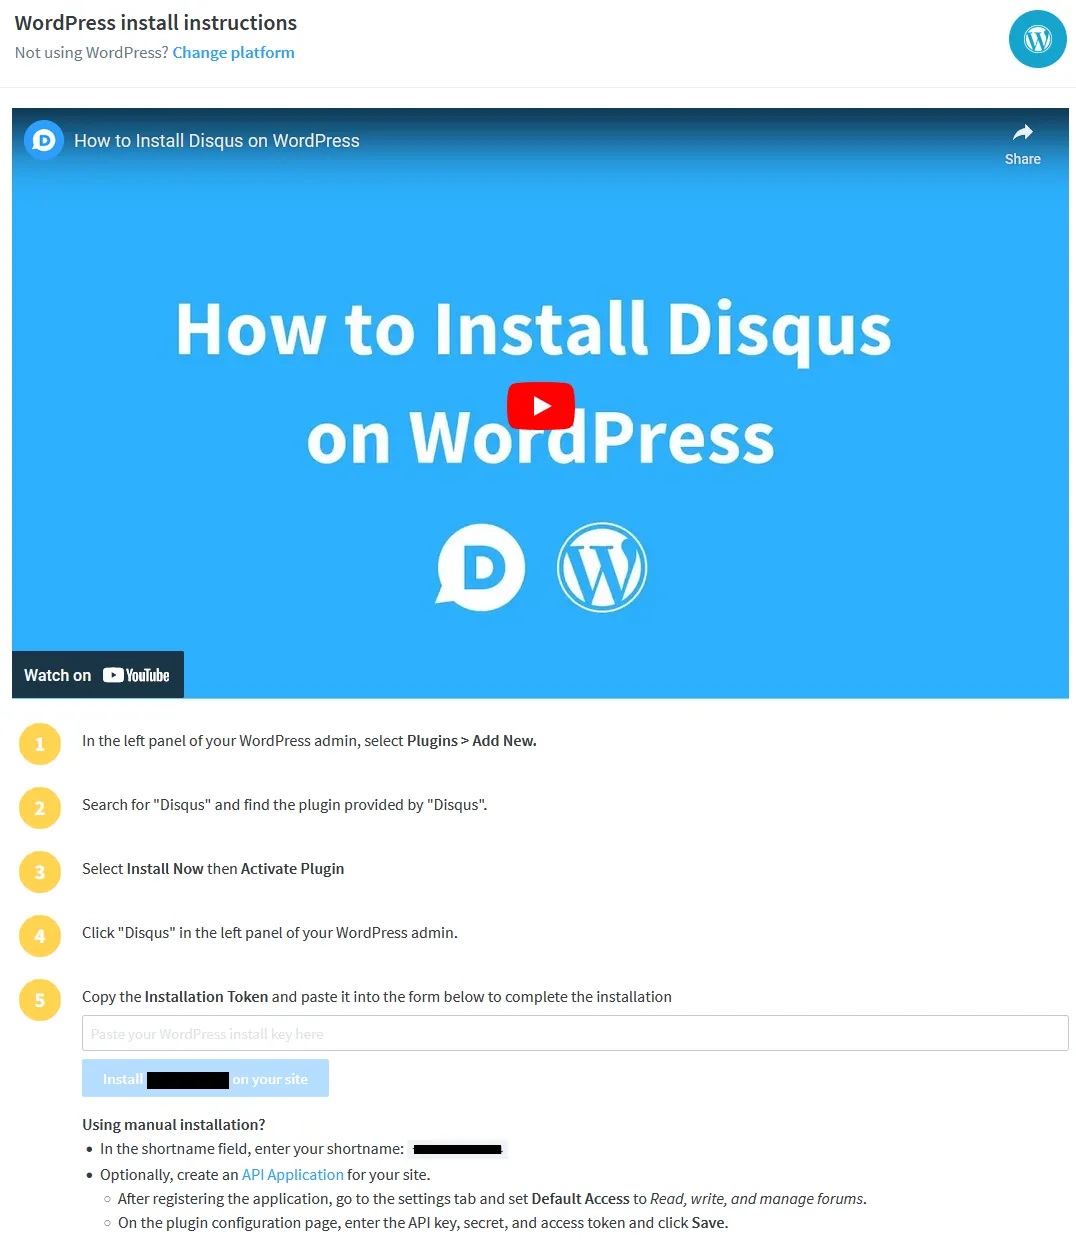 You can see the WordPress install instructions. 